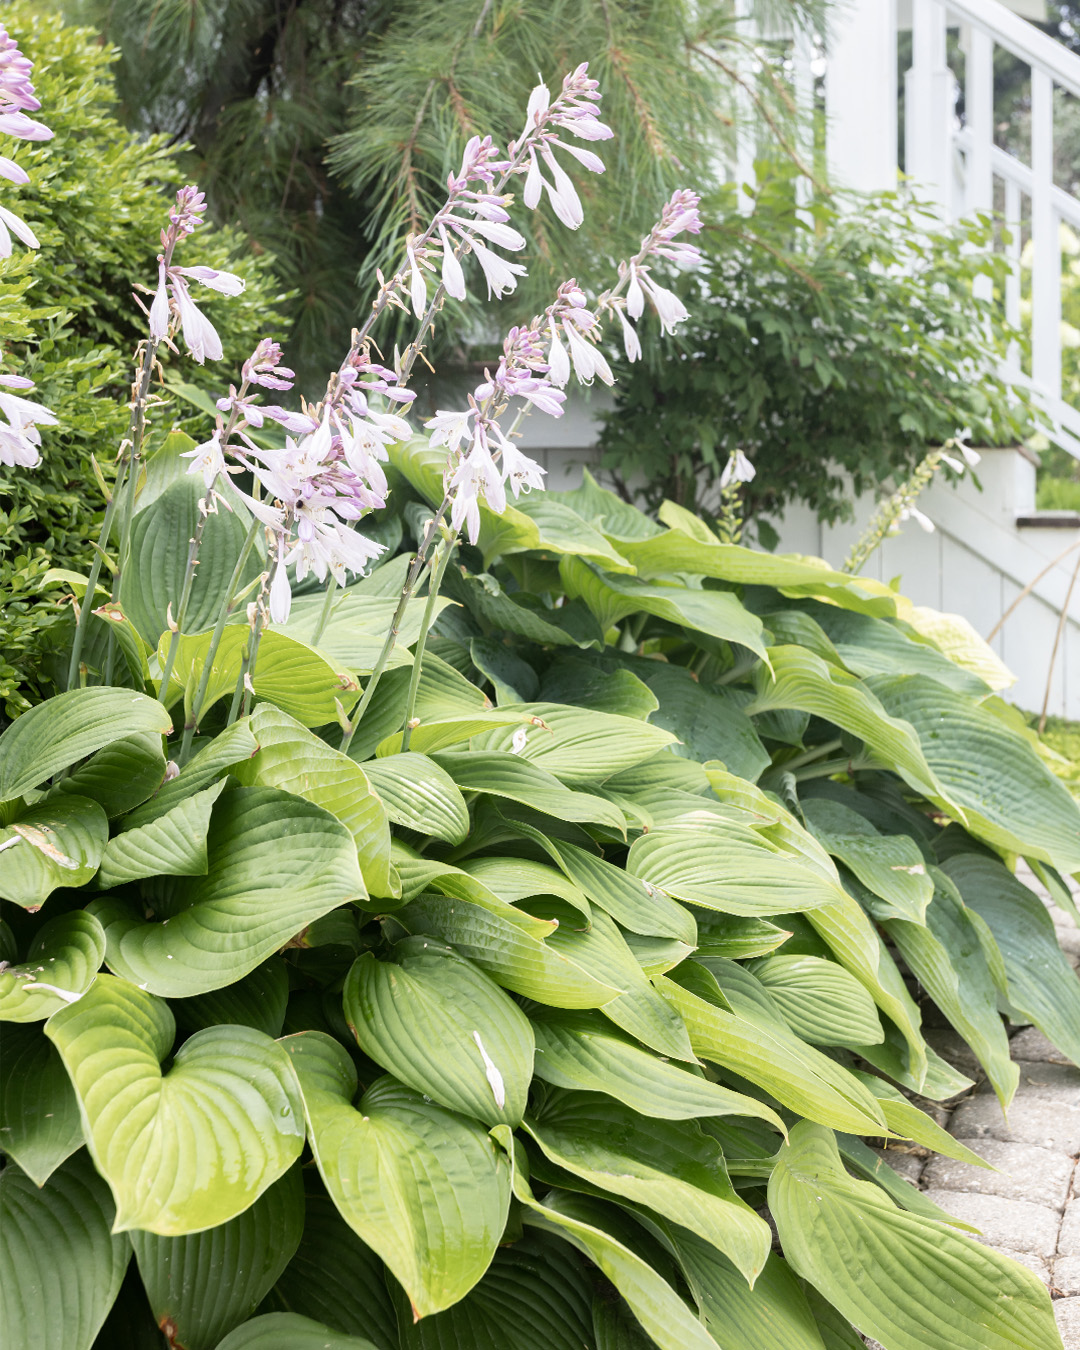 Hostas are easy, go-to plants for many people for perennials beds and general landscaping, but I see the same hosta mistakes happening over and over again. Here are some of the ones I see most frequently that are super quick and simple to fix.